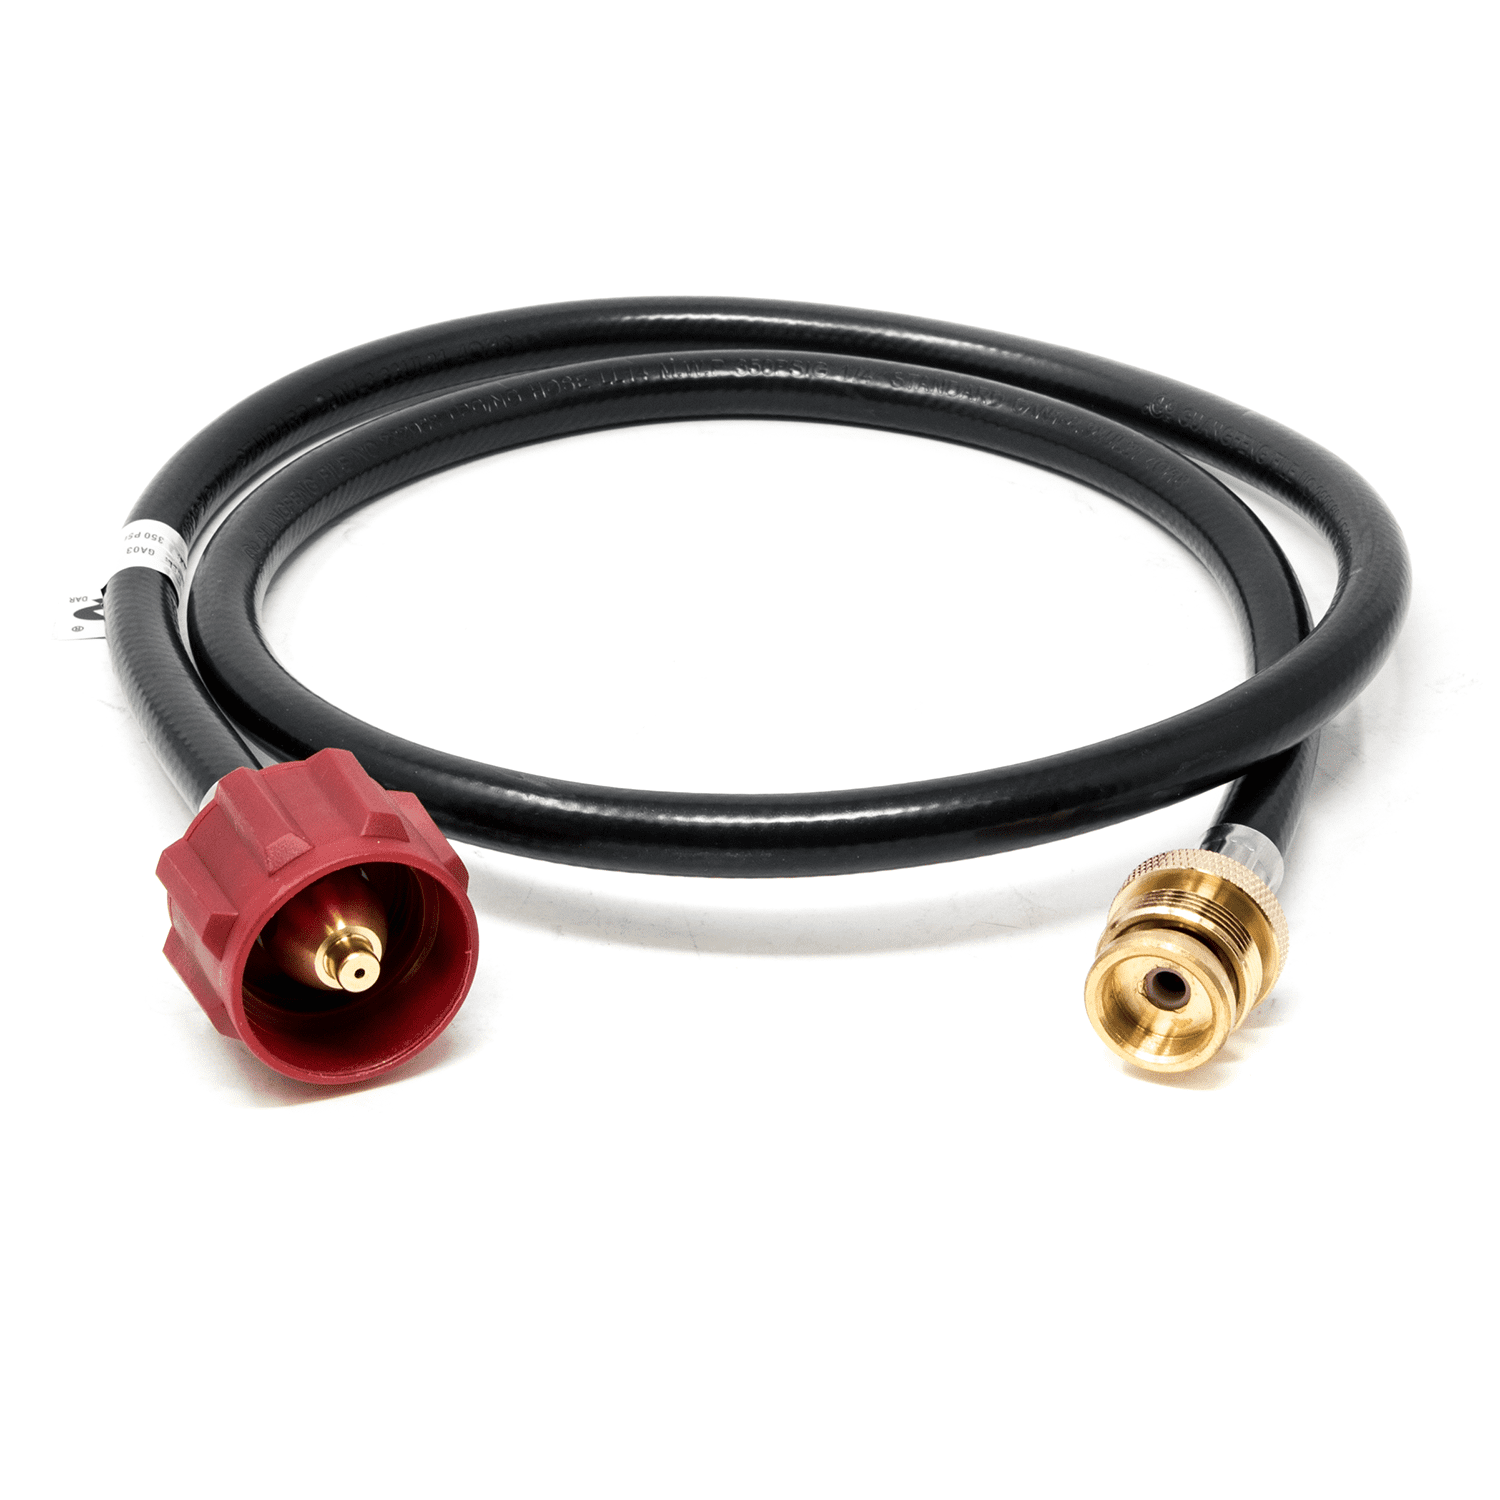 Propane Refill Adapter Kit One Pound Small Cylinder Hose 1lb to 20lb Tank 4 ft 